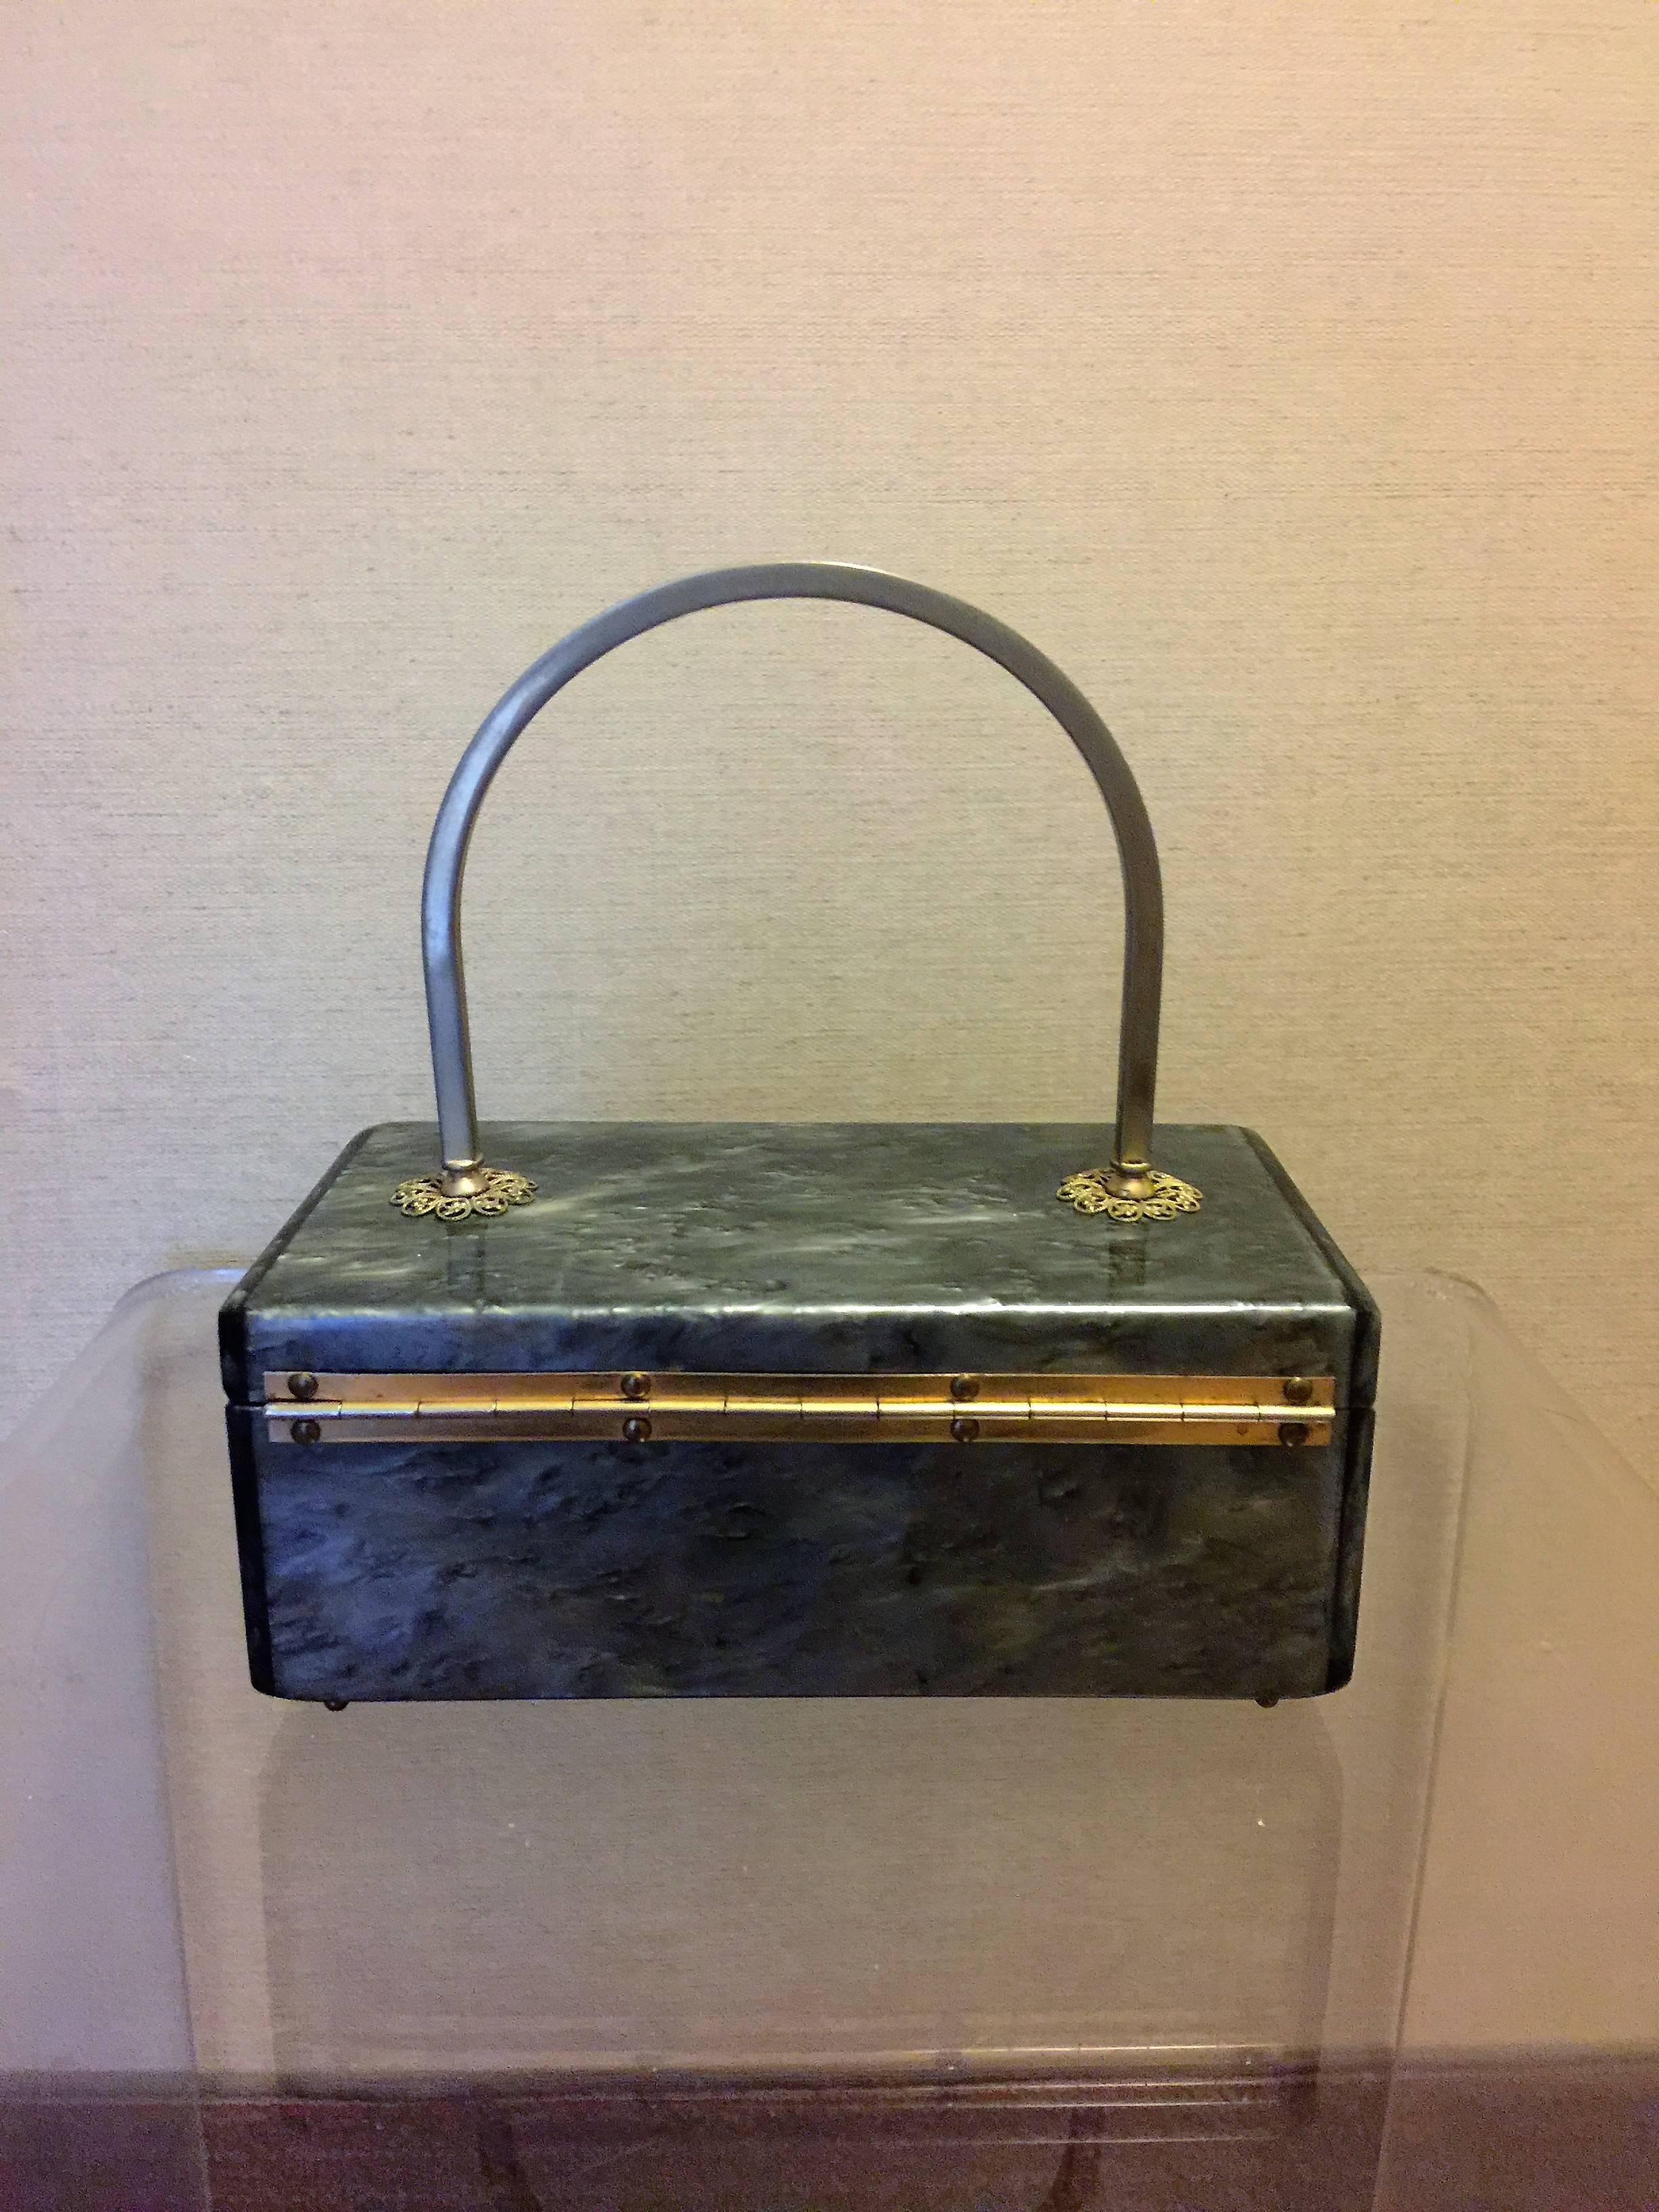 Grey Pearlized Lucite Handbag with Brass Filagree Accents By Toro In Good Condition For Sale In New York, NY